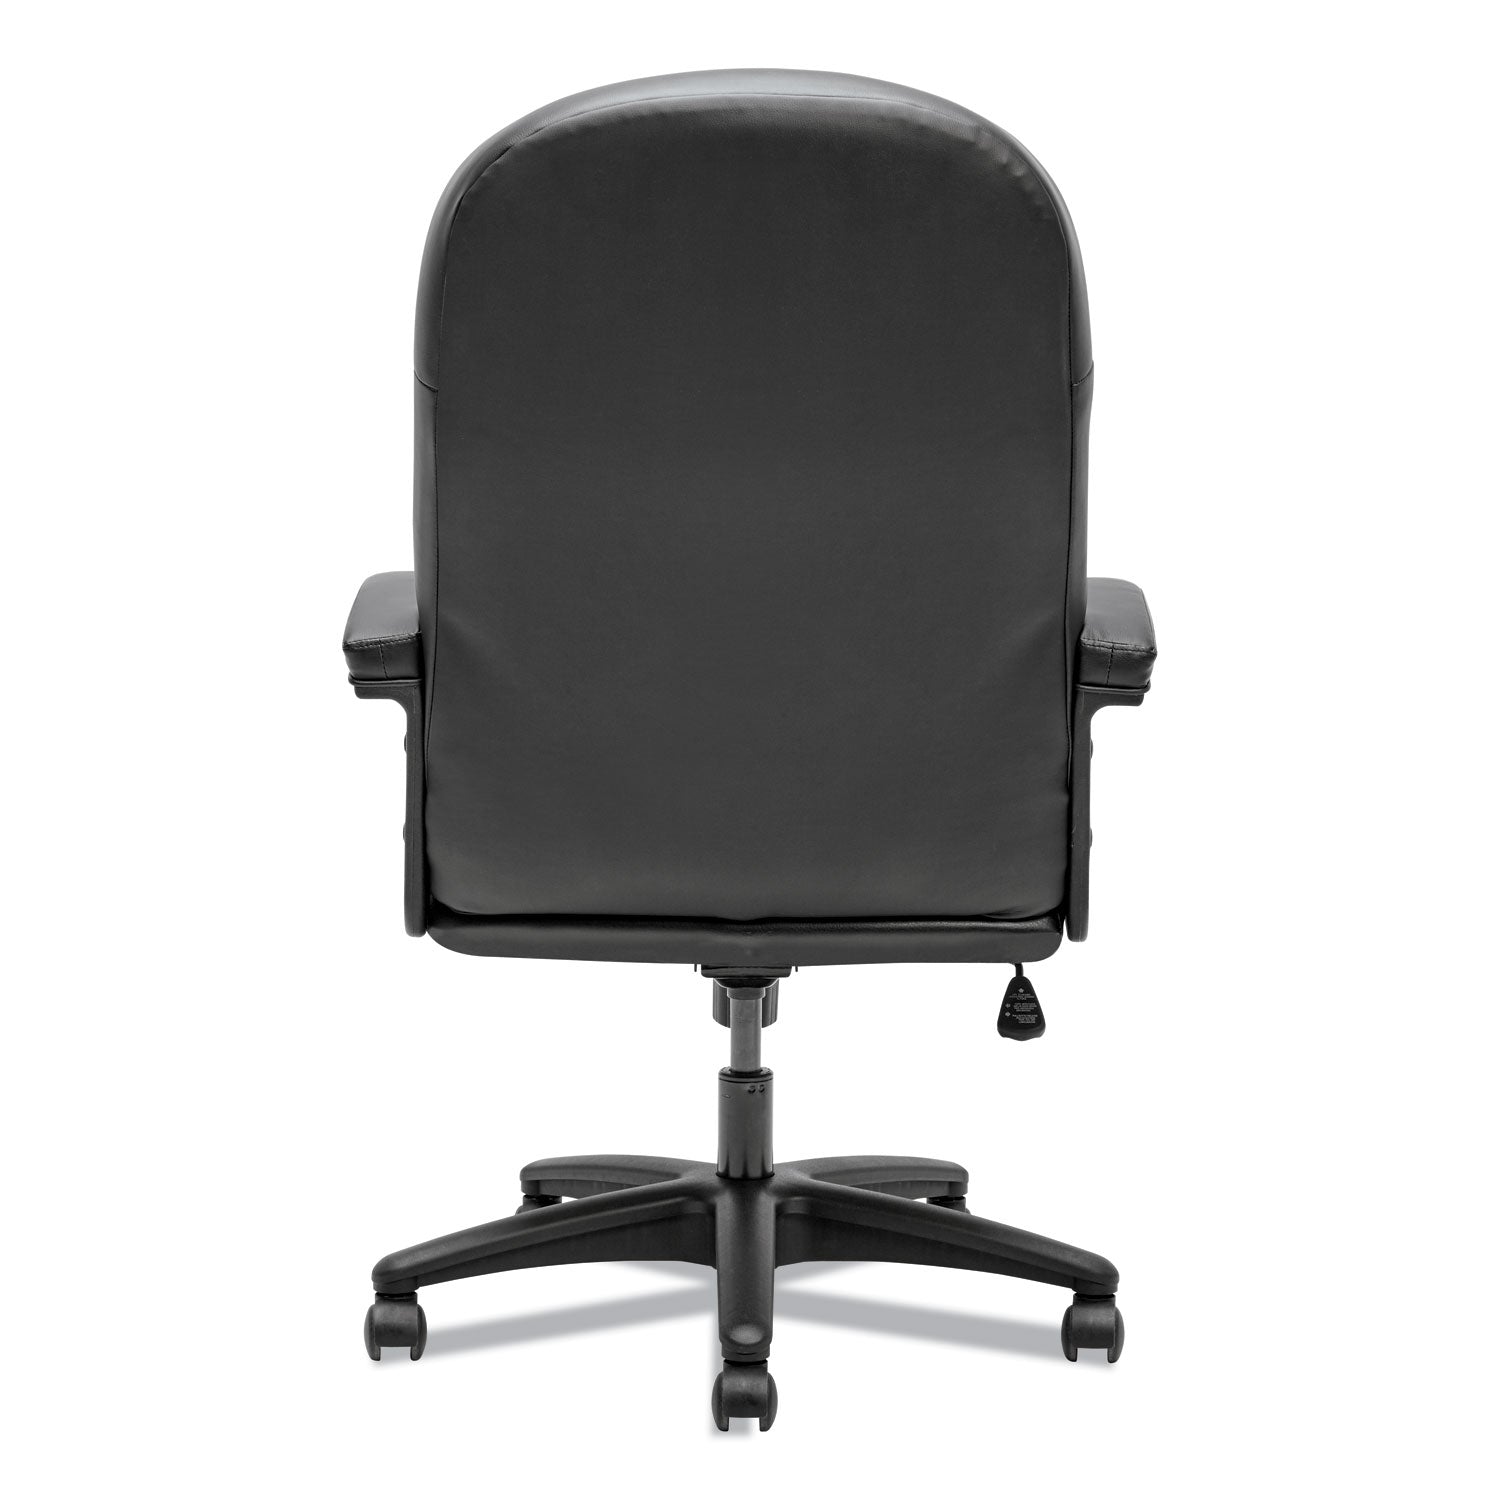 pillow-soft-2090-series-executive-high-back-swivel-tilt-chair-supports-up-to-250-lb-16-to-21-seat-height-black_hon2095hpwst11t - 3